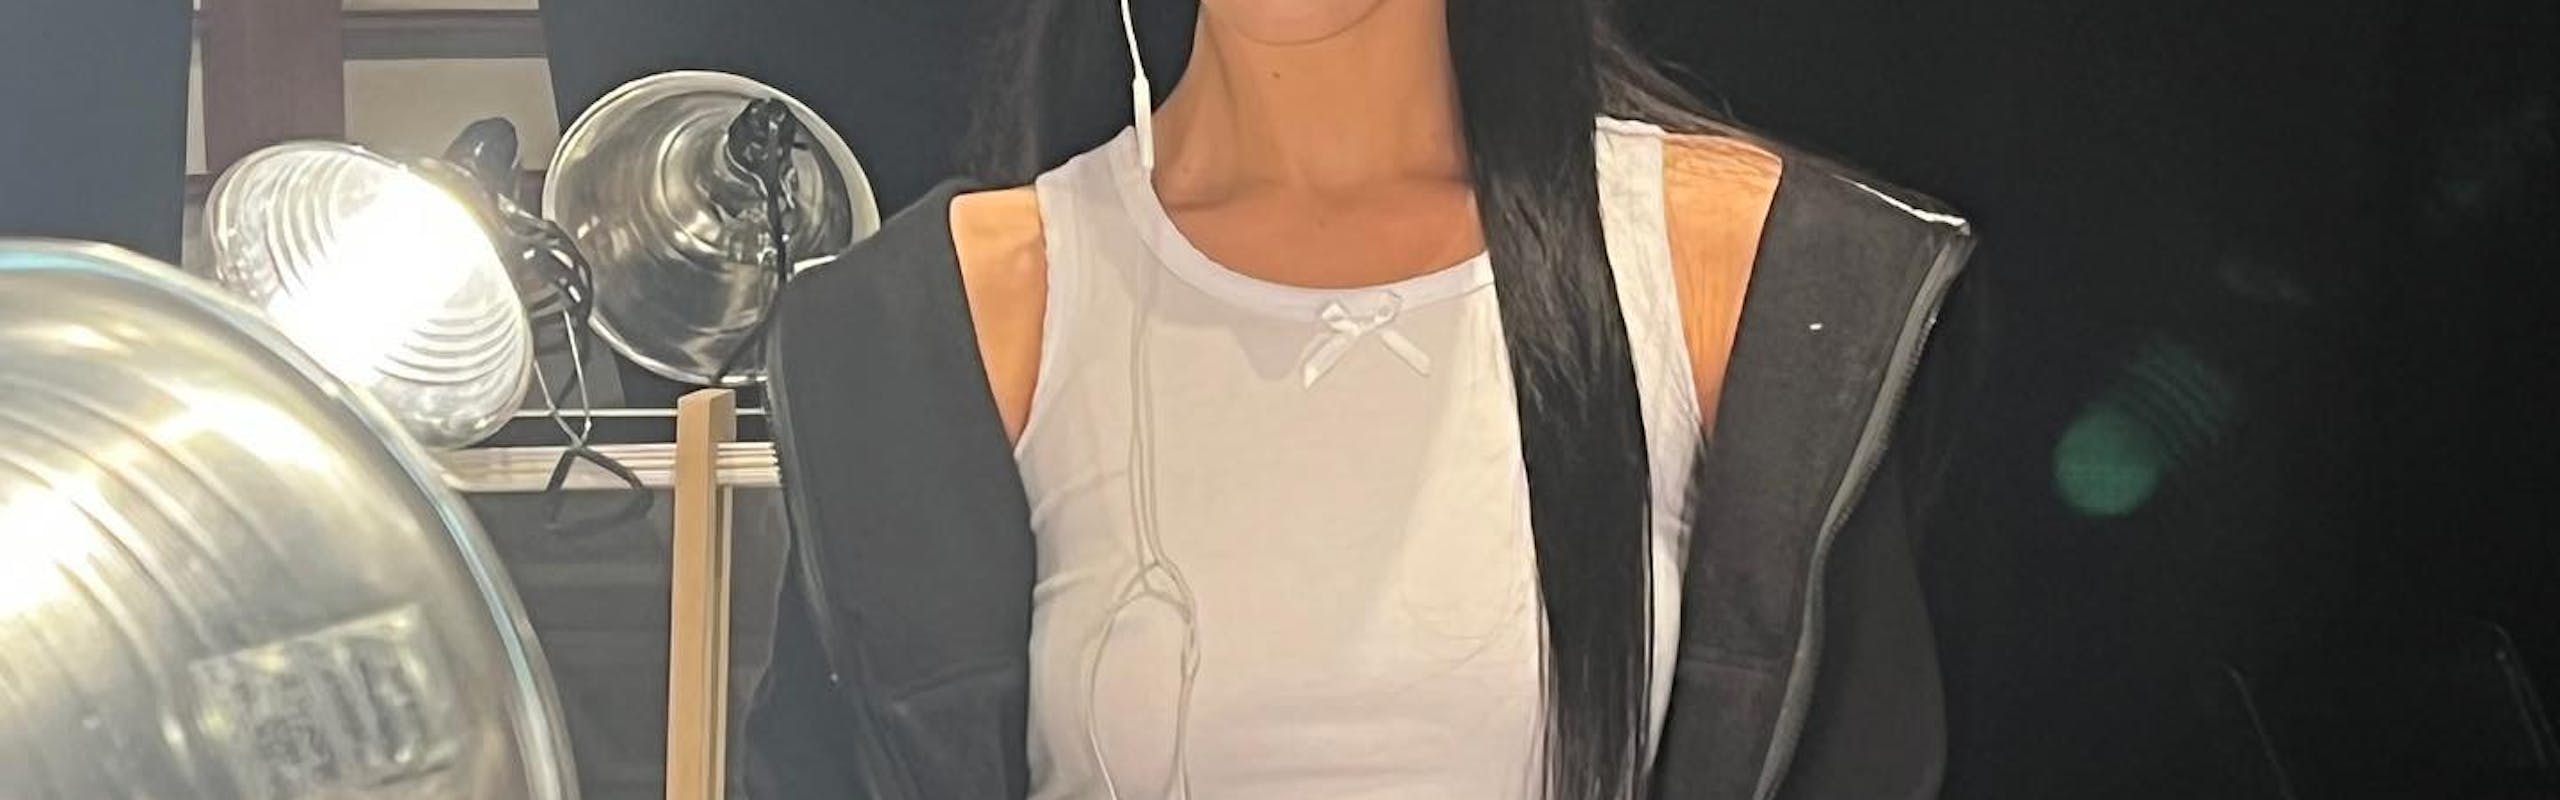 Bella Hadid backstage at Marc Jacobs with bleached eyebrows and a mullet. She is wearing a white tank top, black jacket, two-tone denim jeans and wired headphones.